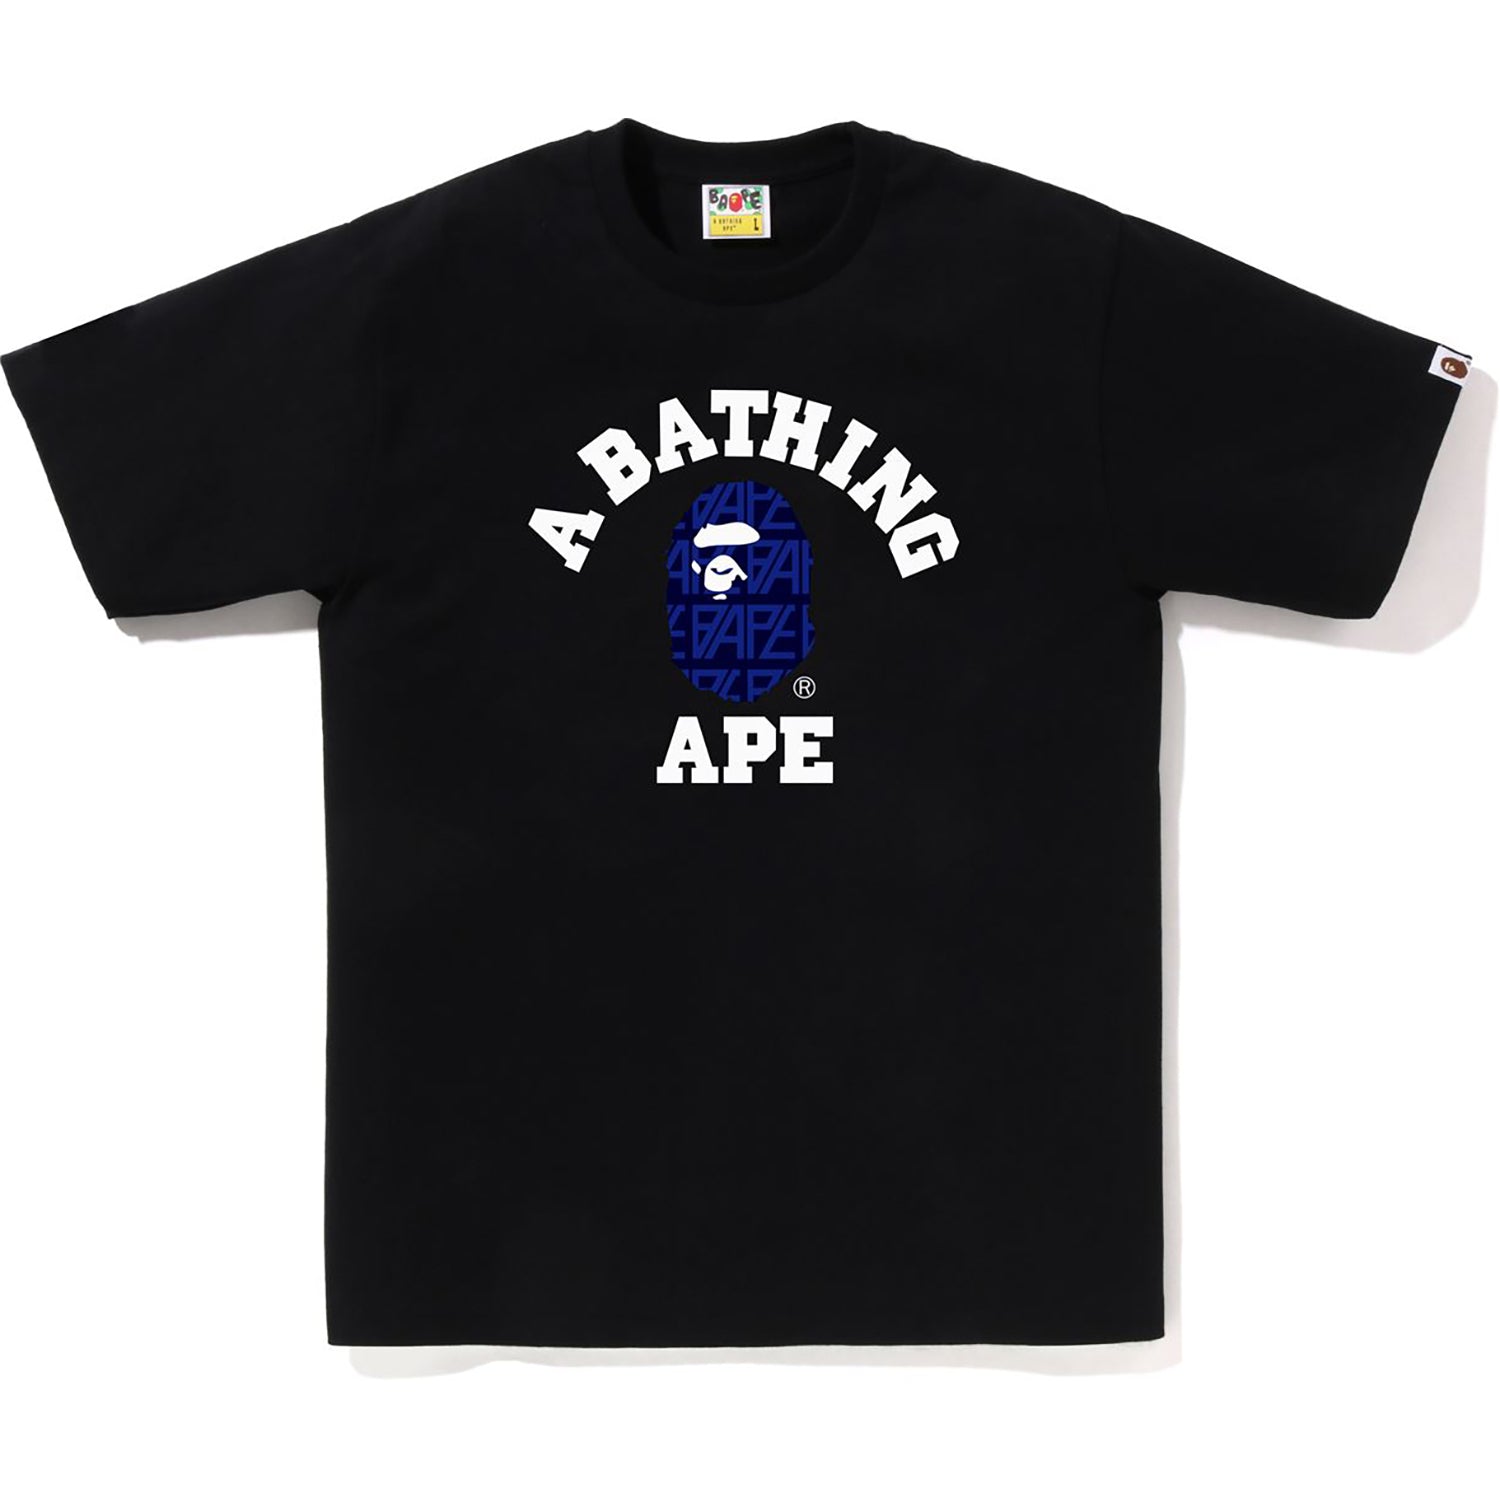 BAPE College & By Bathing Loose Fit Crewneck Navy